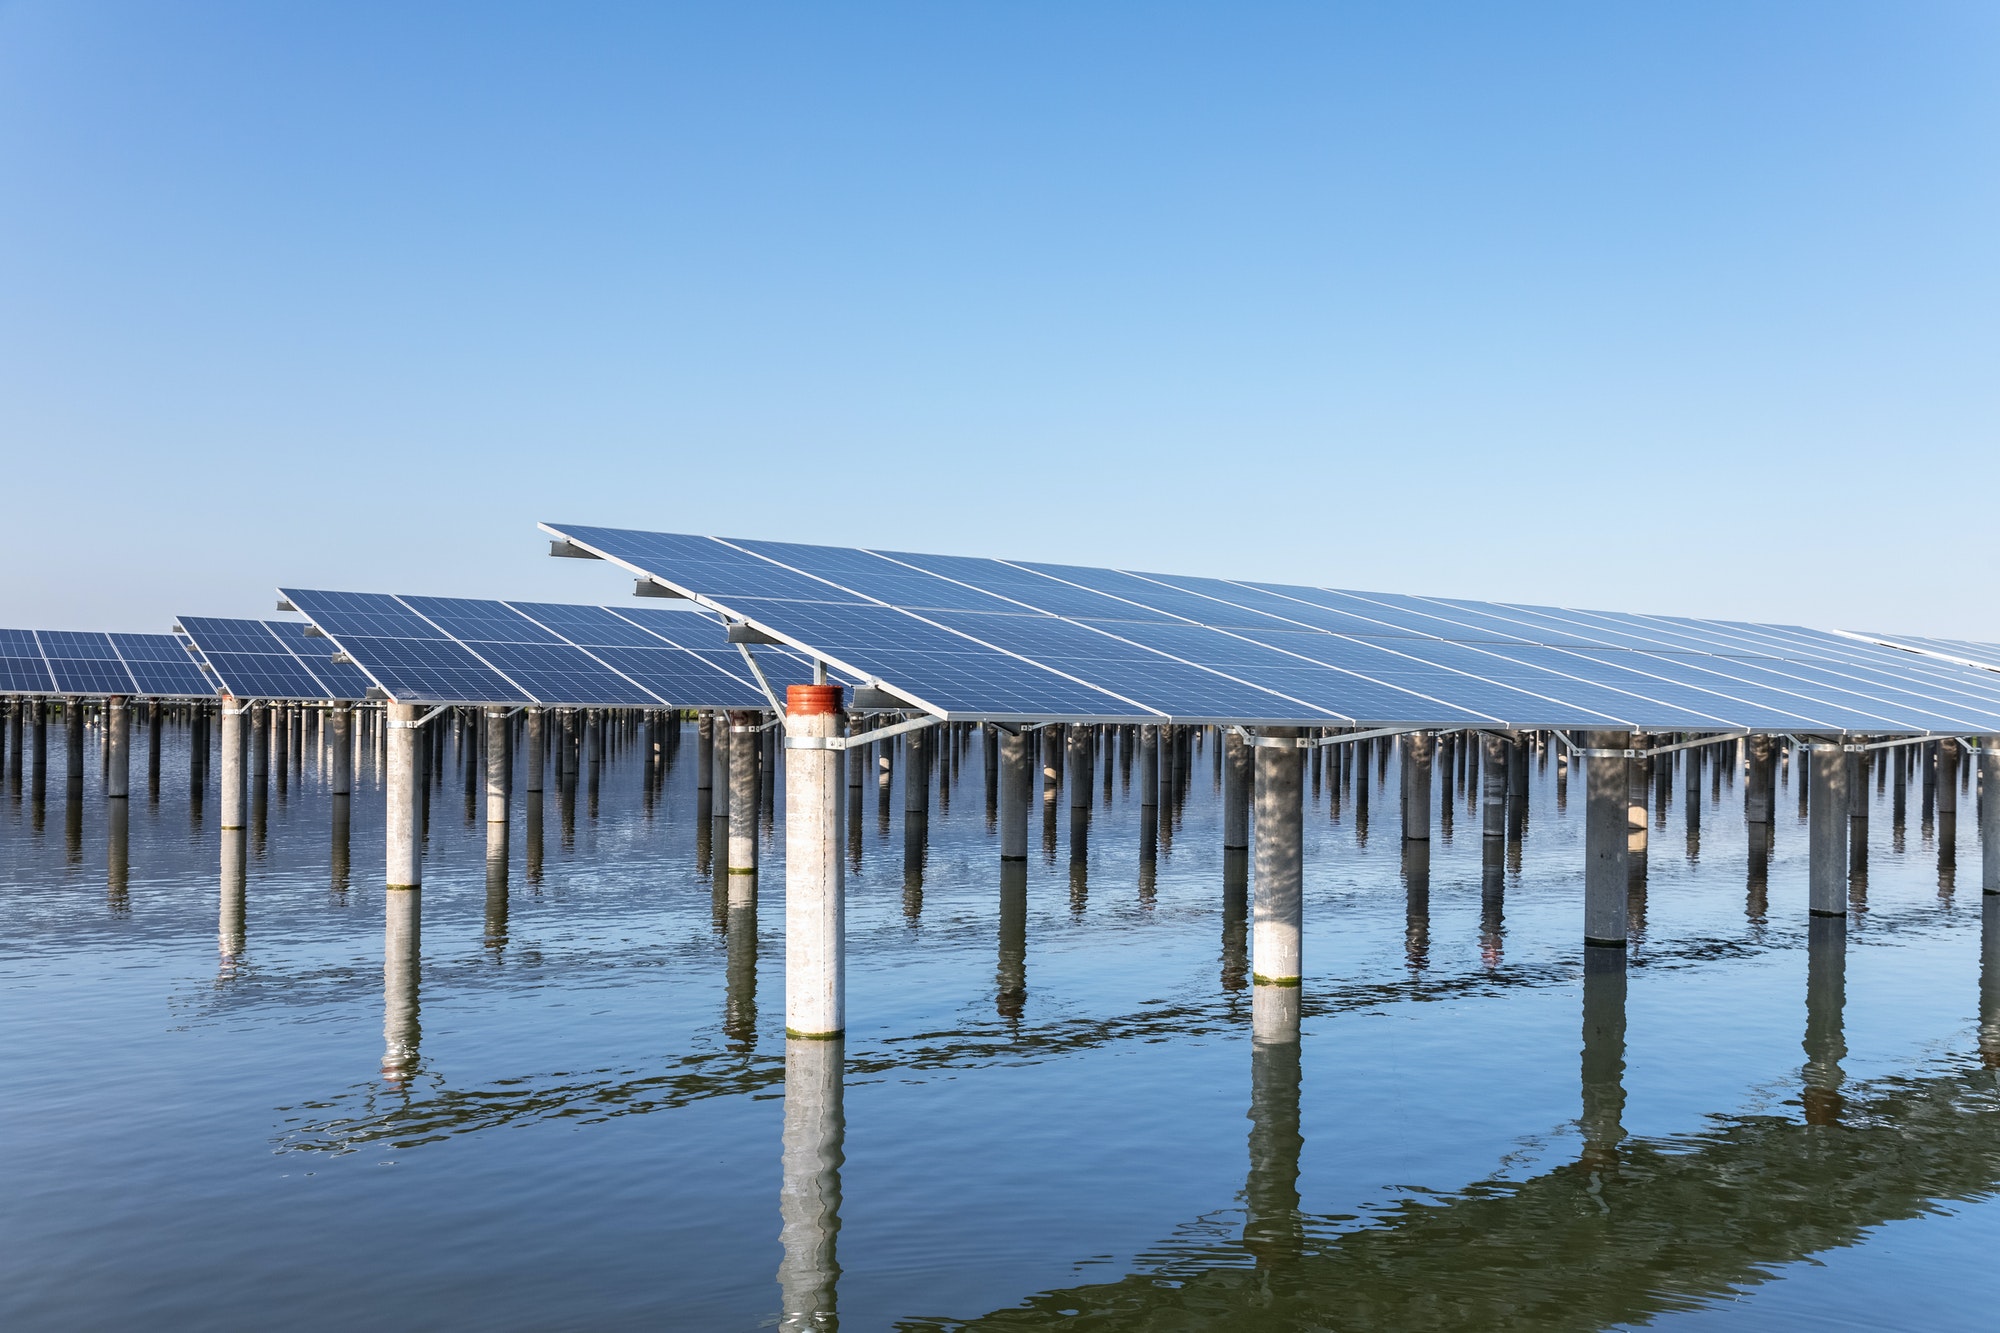 rows-of-solar-panels-on-the-water.jpg